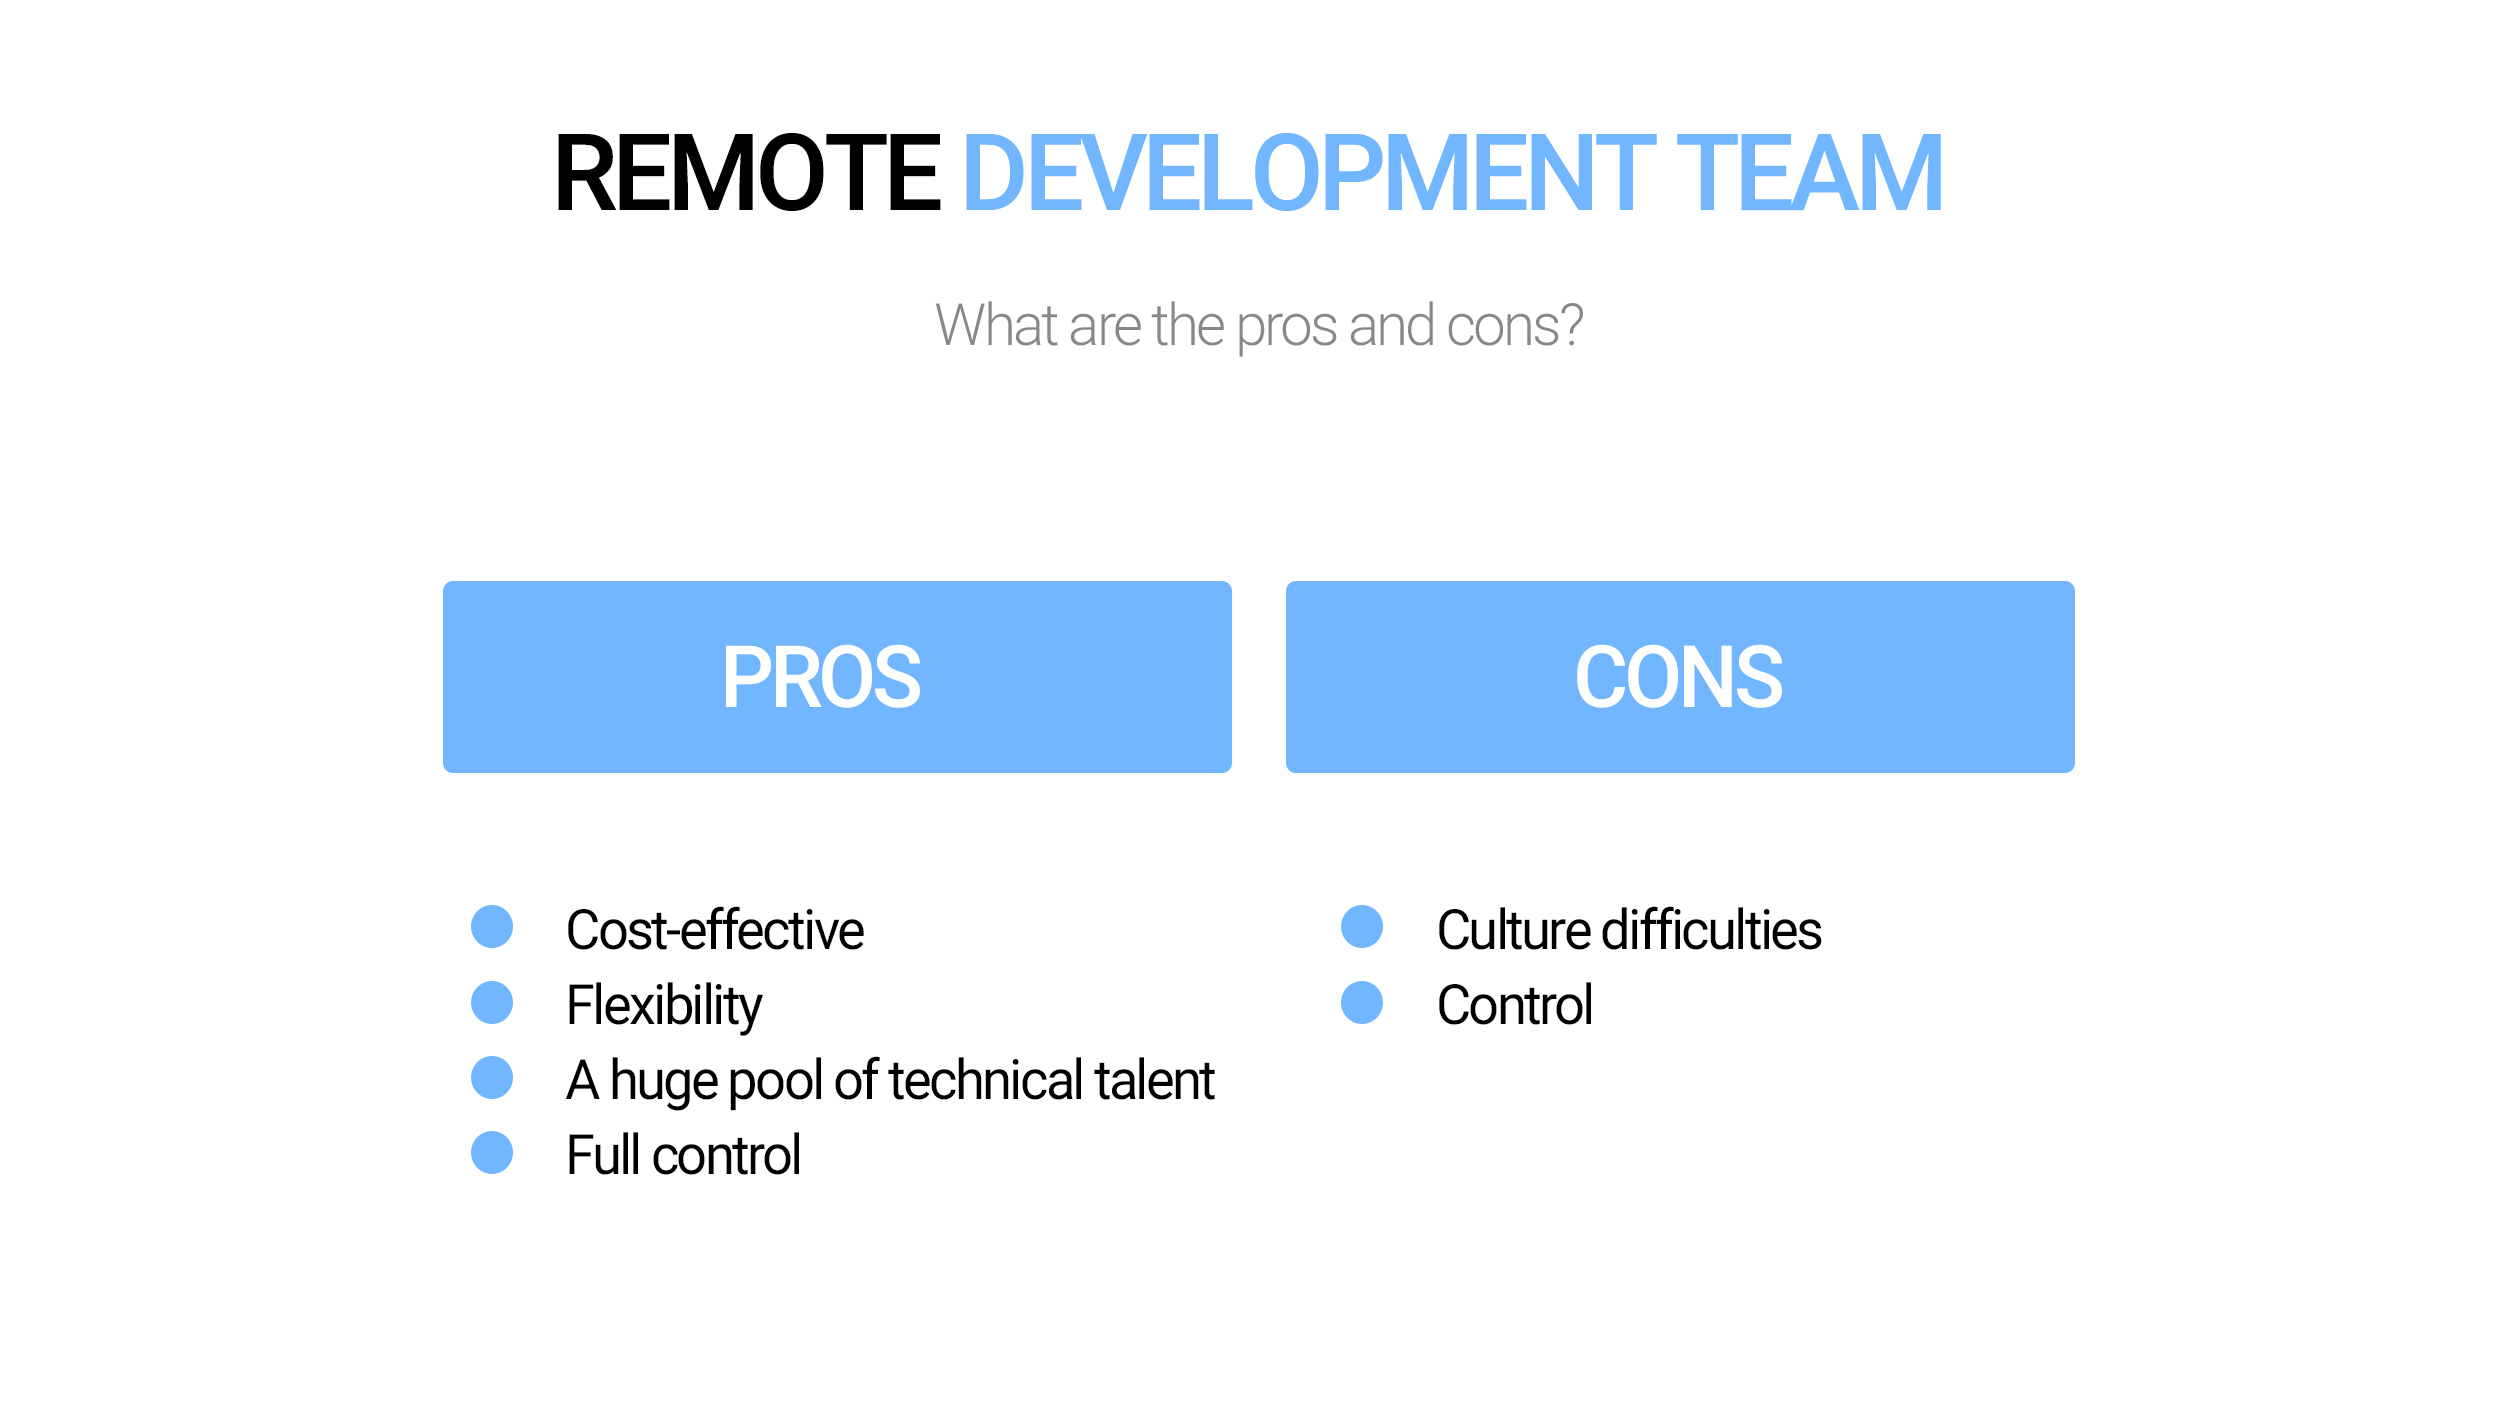 Pros and сons of the remote development teams